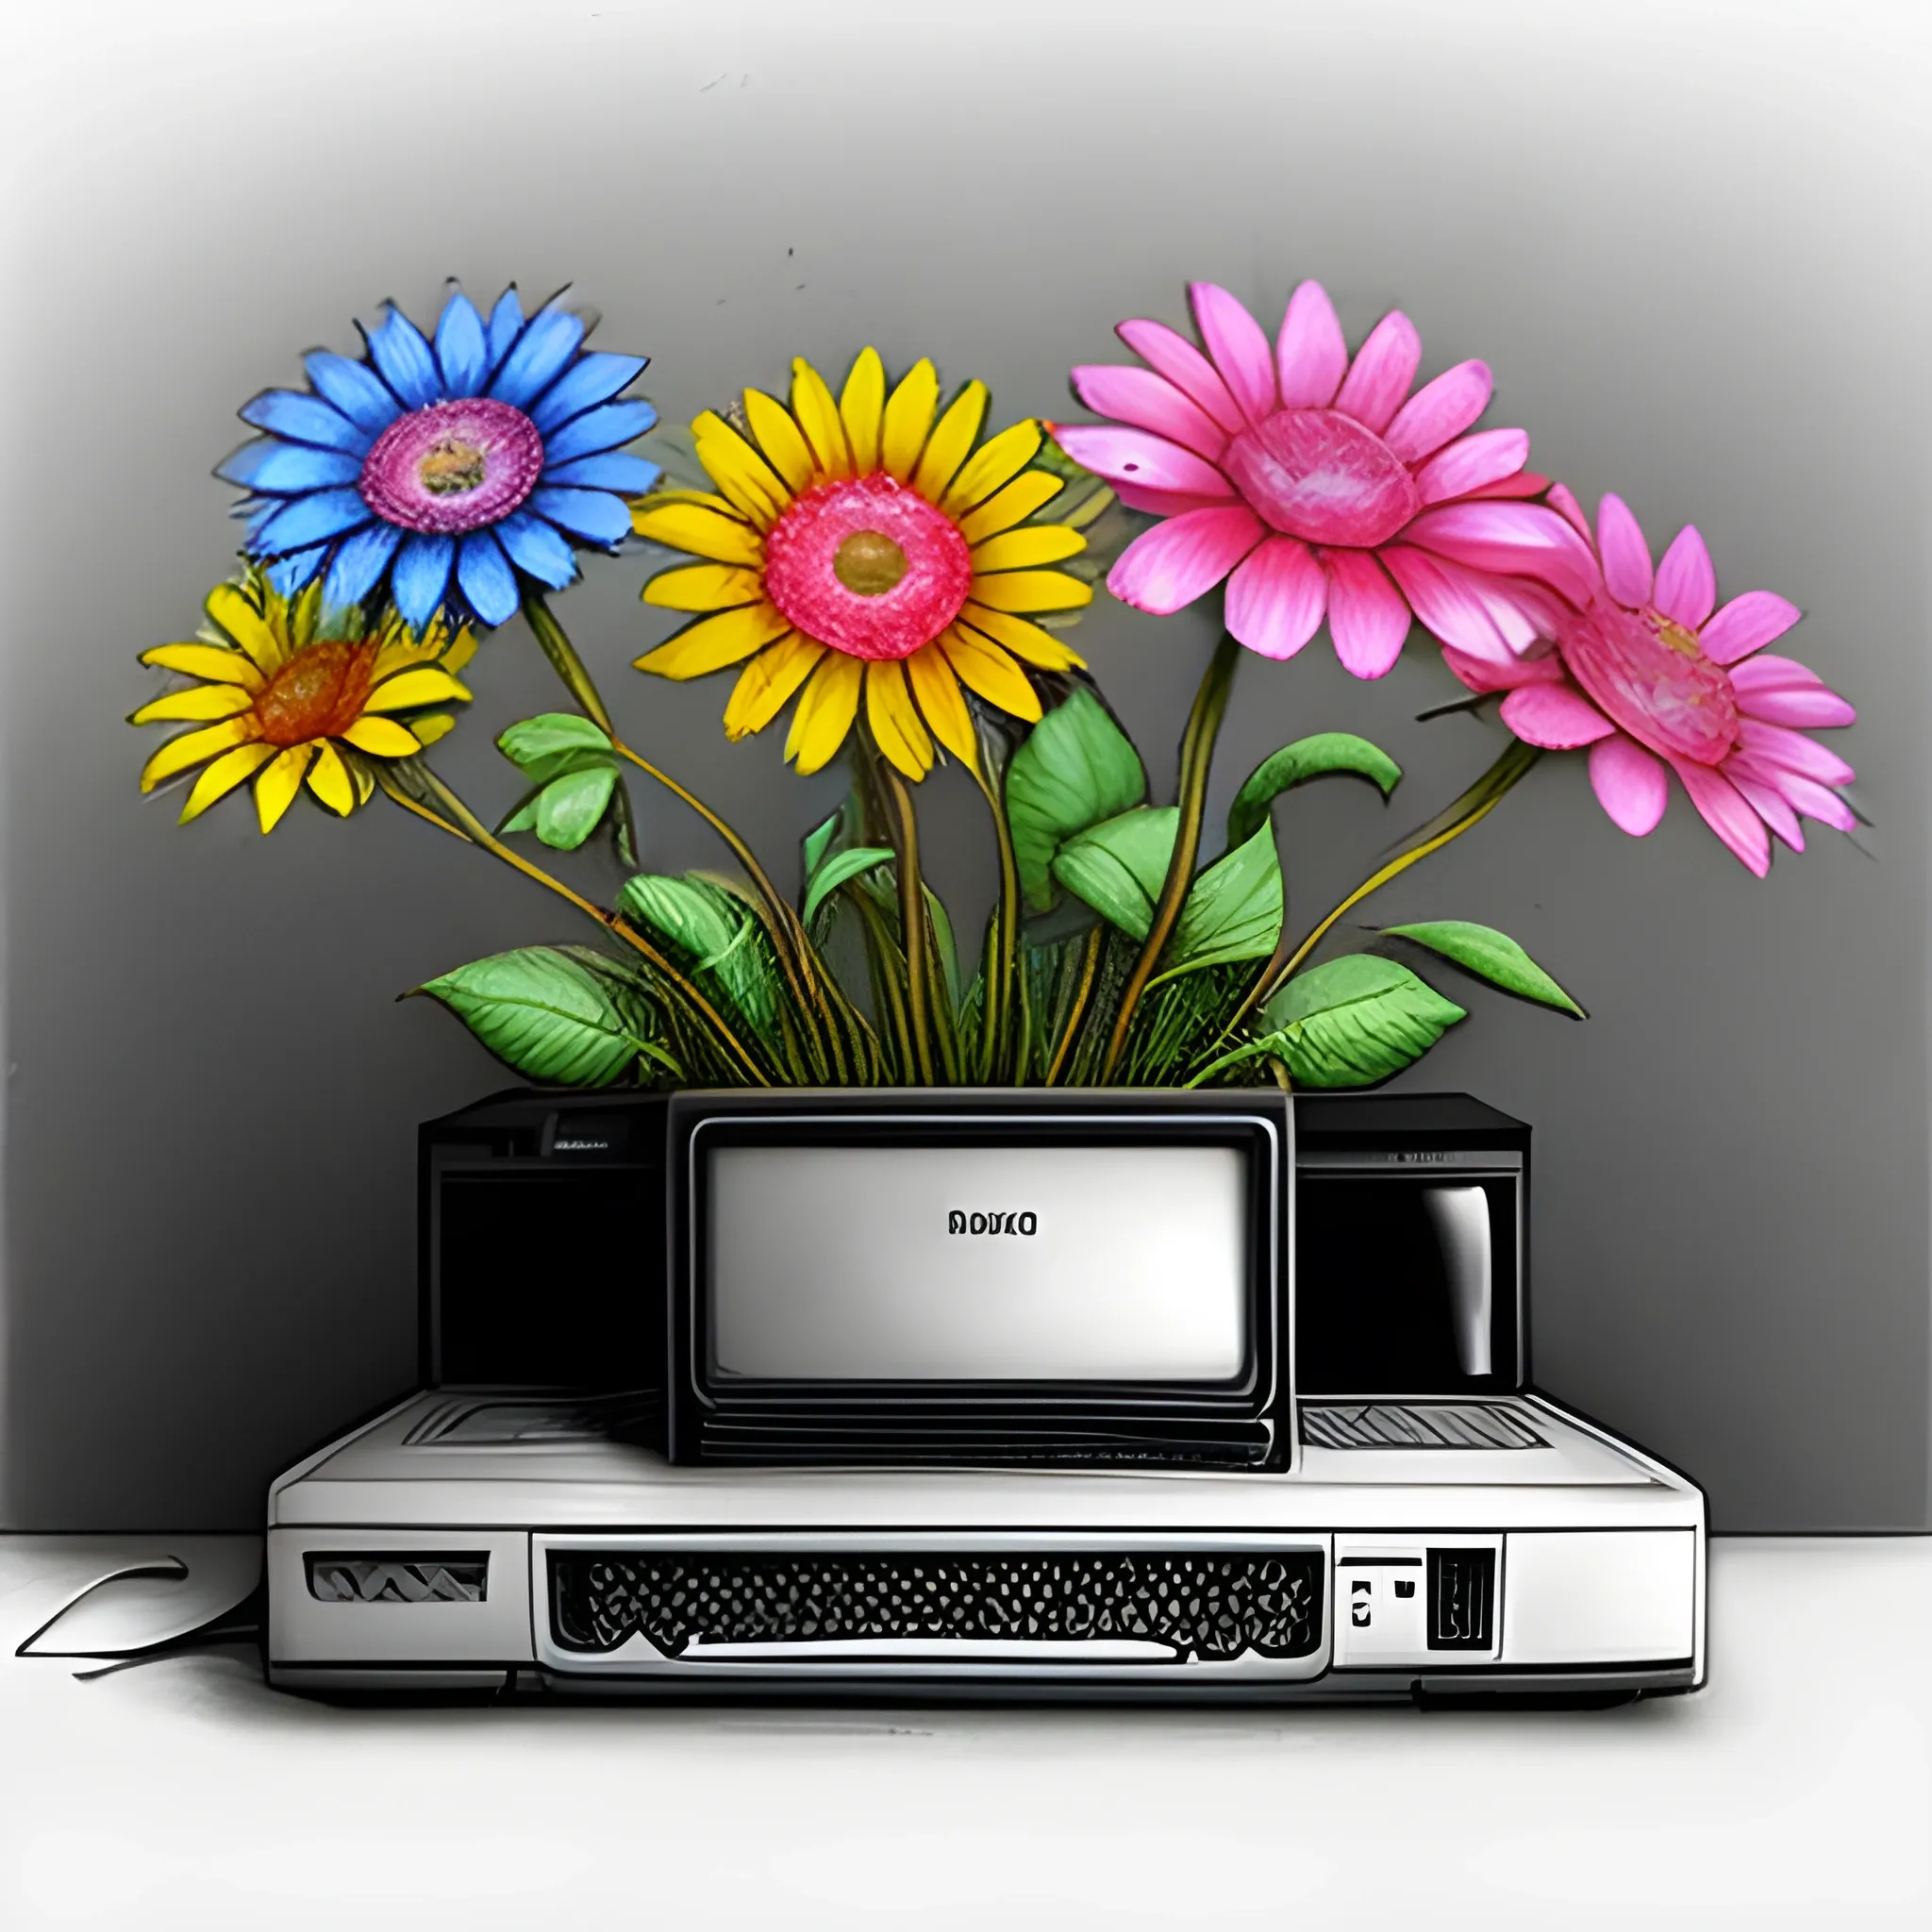 flowers growing from an old computer, using different colours on the flowers  , Pencil Sketch